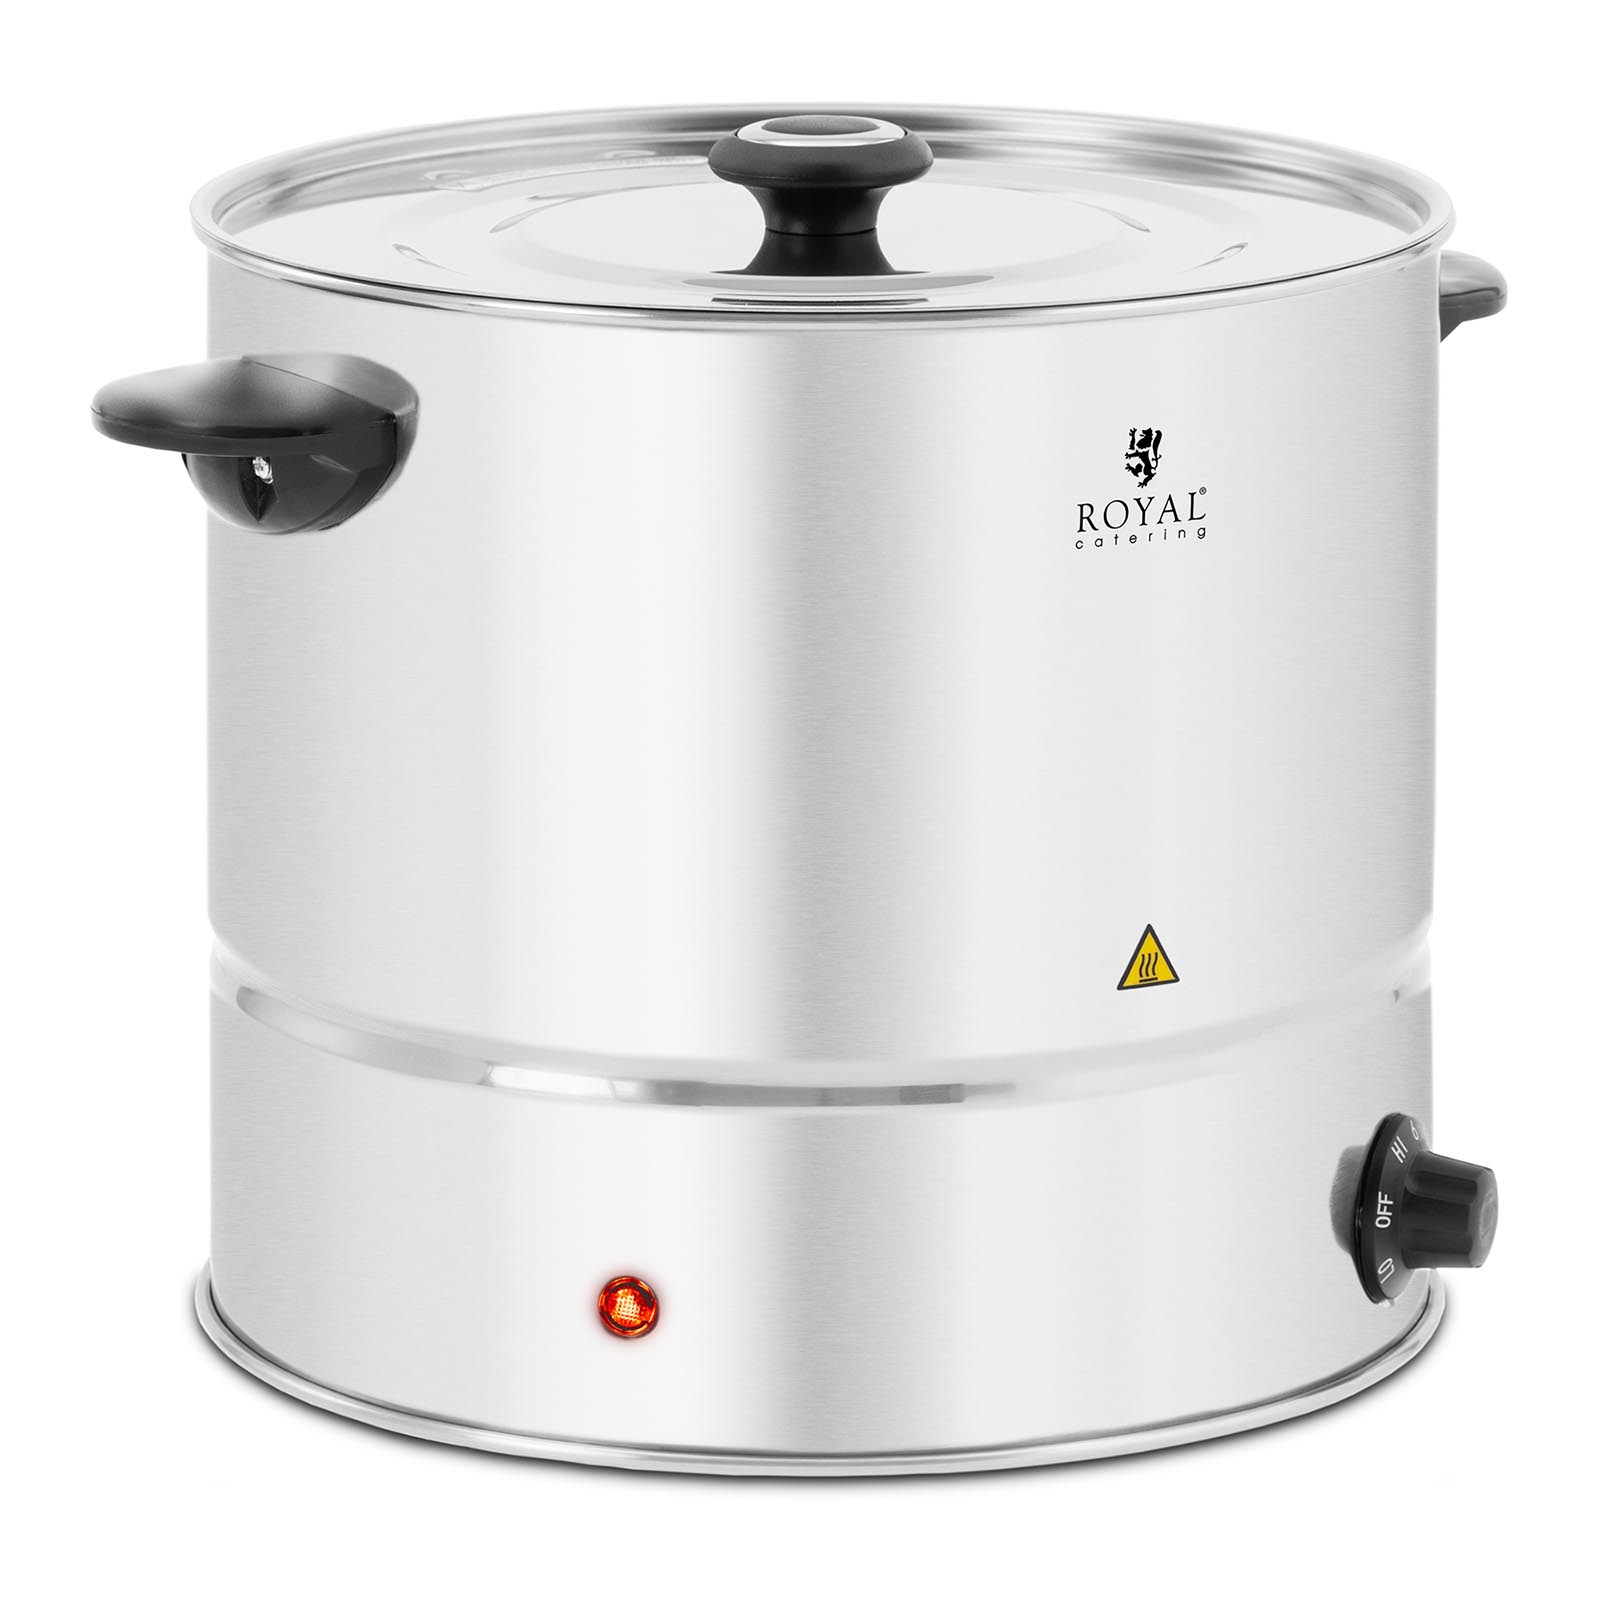 Dampfgarer - 13 L - 1000 W - Royal Catering